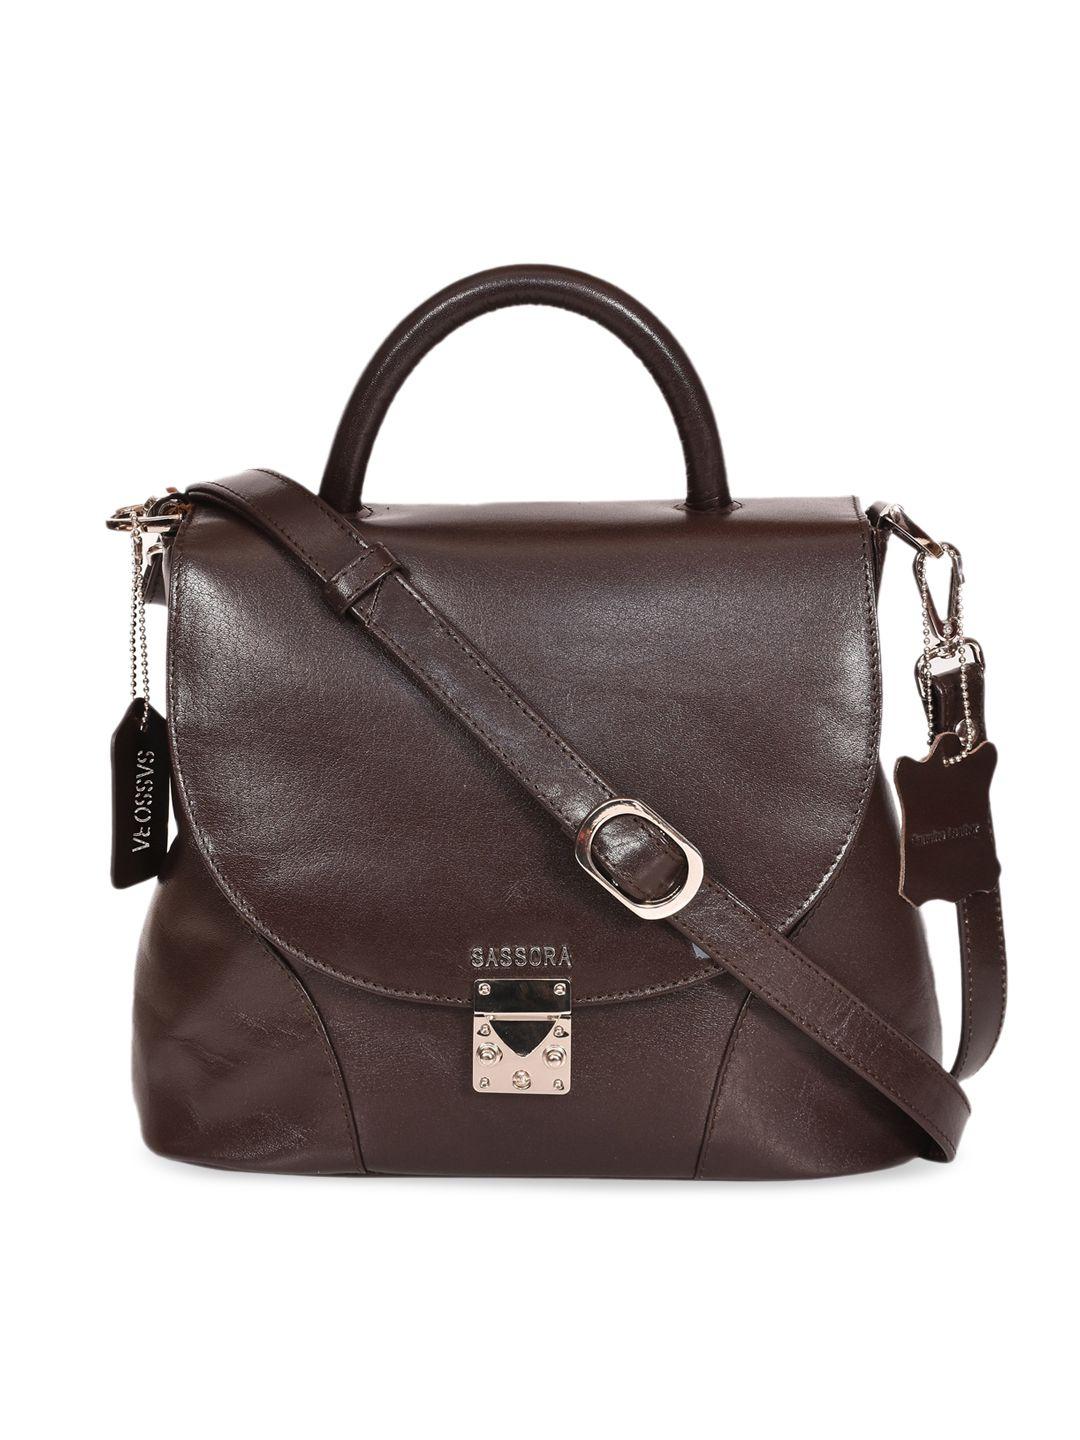 sassora brown leather bowling satchel with tasselled